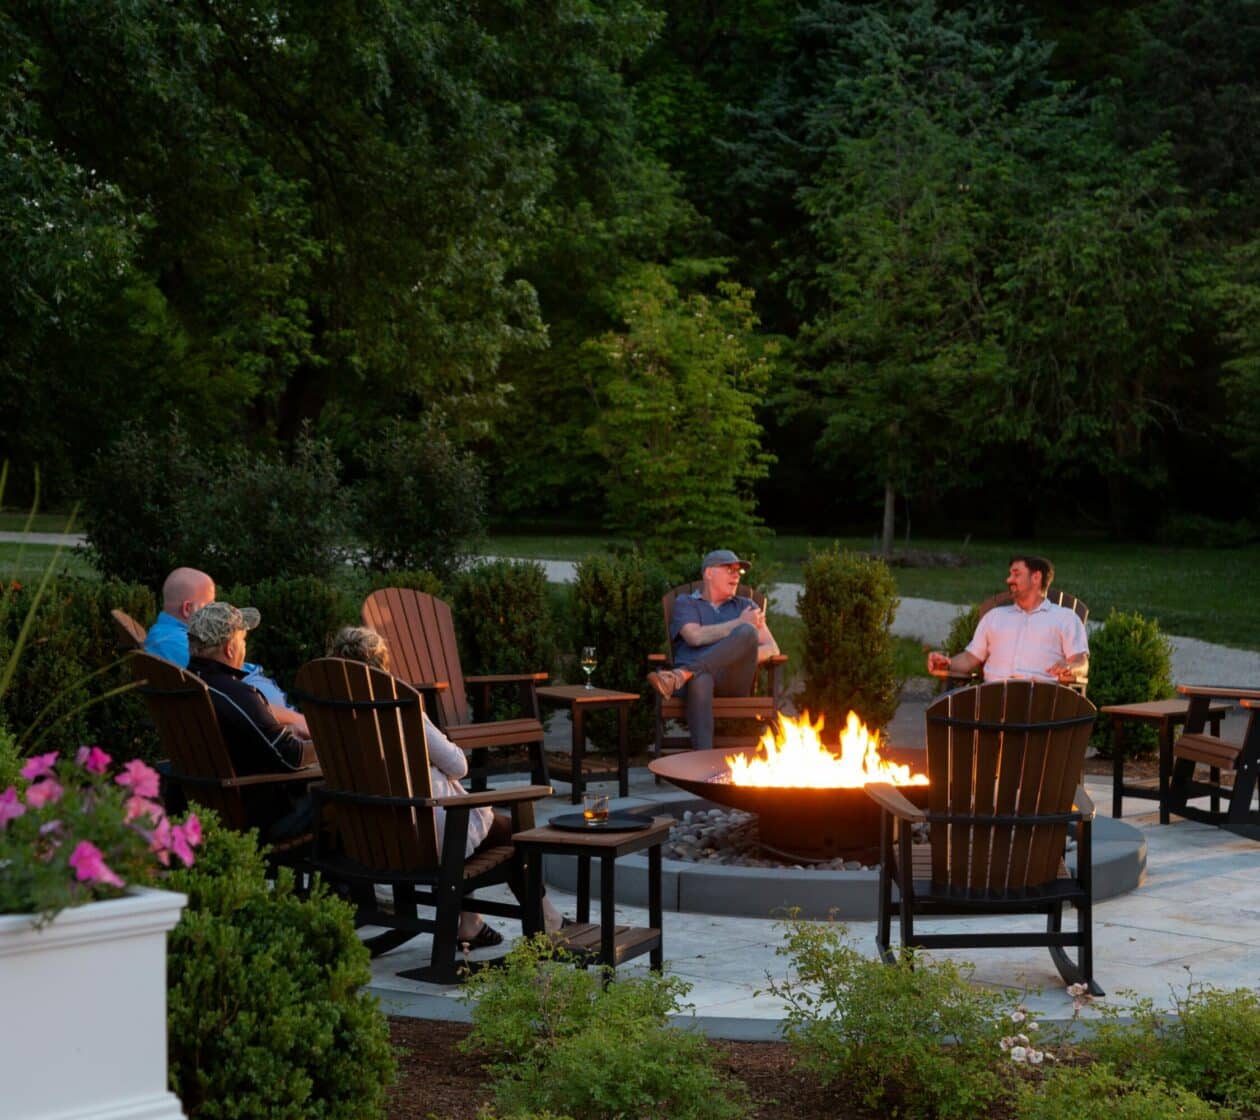 A group of friends gather around a fire pit and roast hotdogs